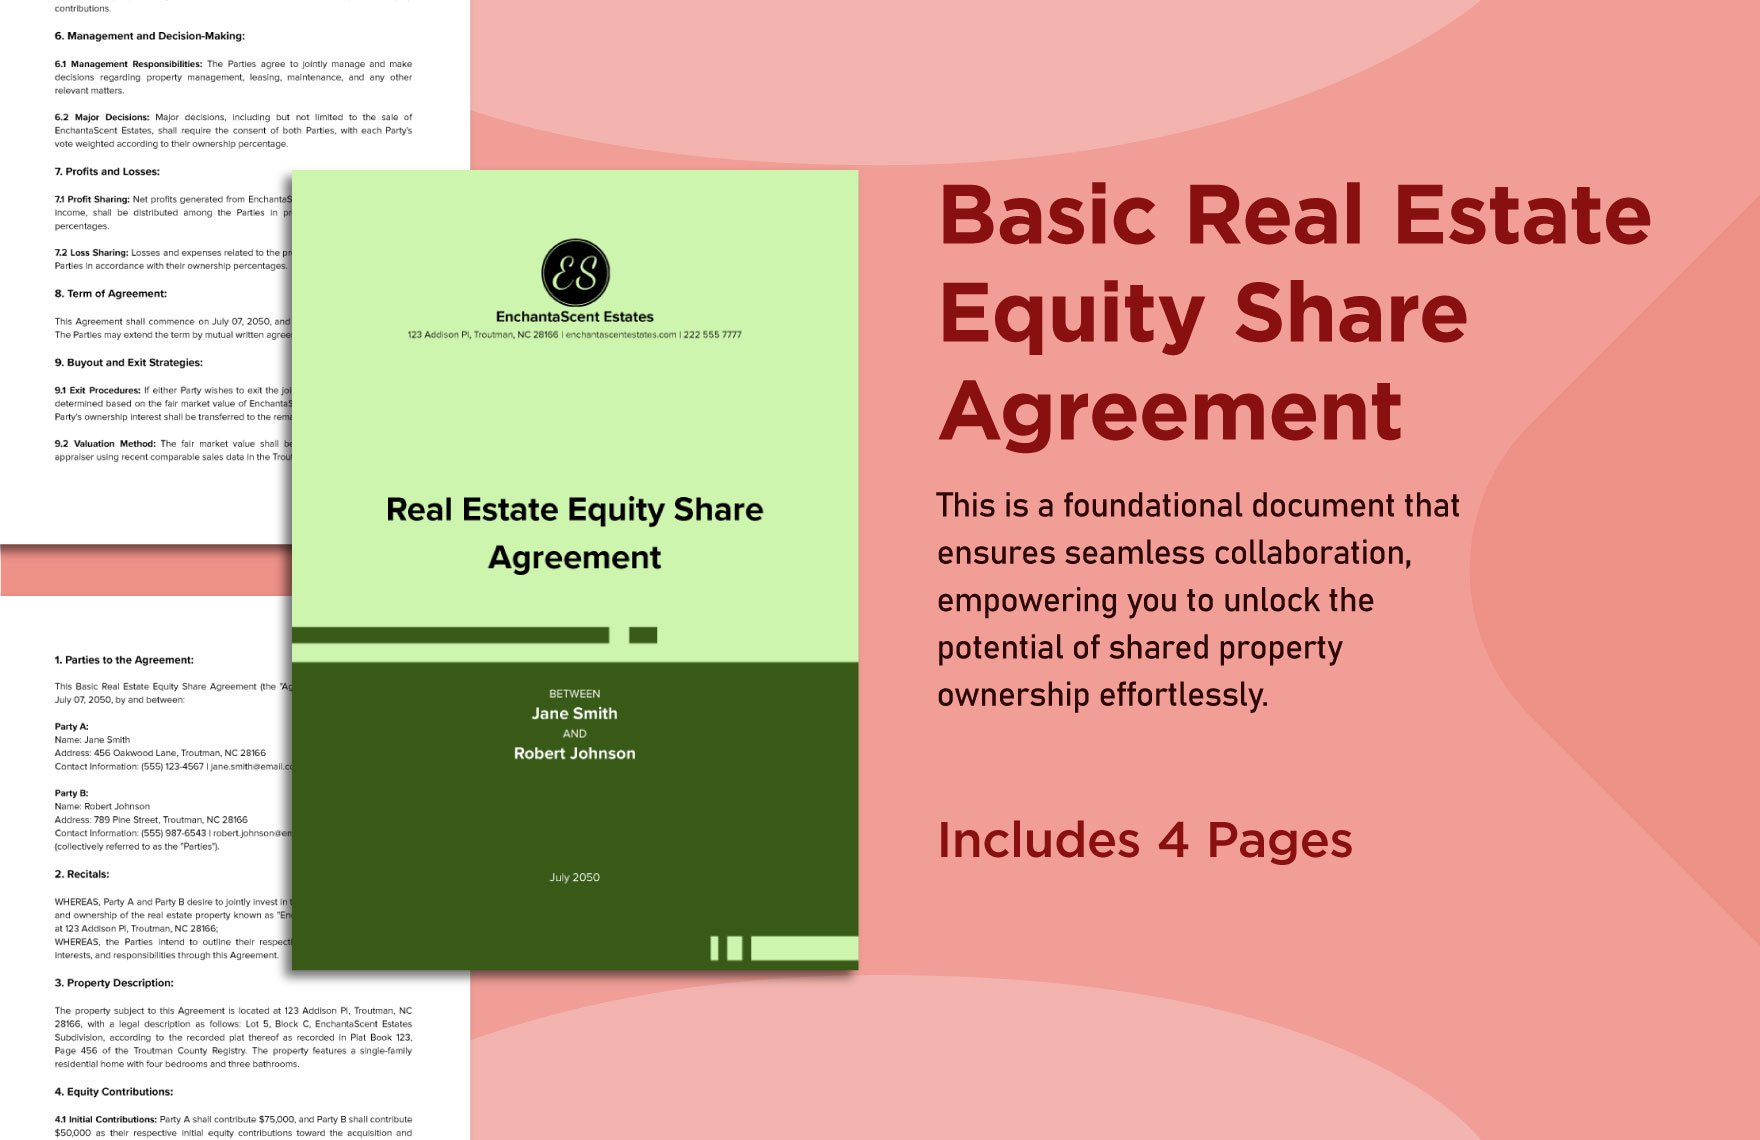 Basic Real Estate Equity Share Agreement